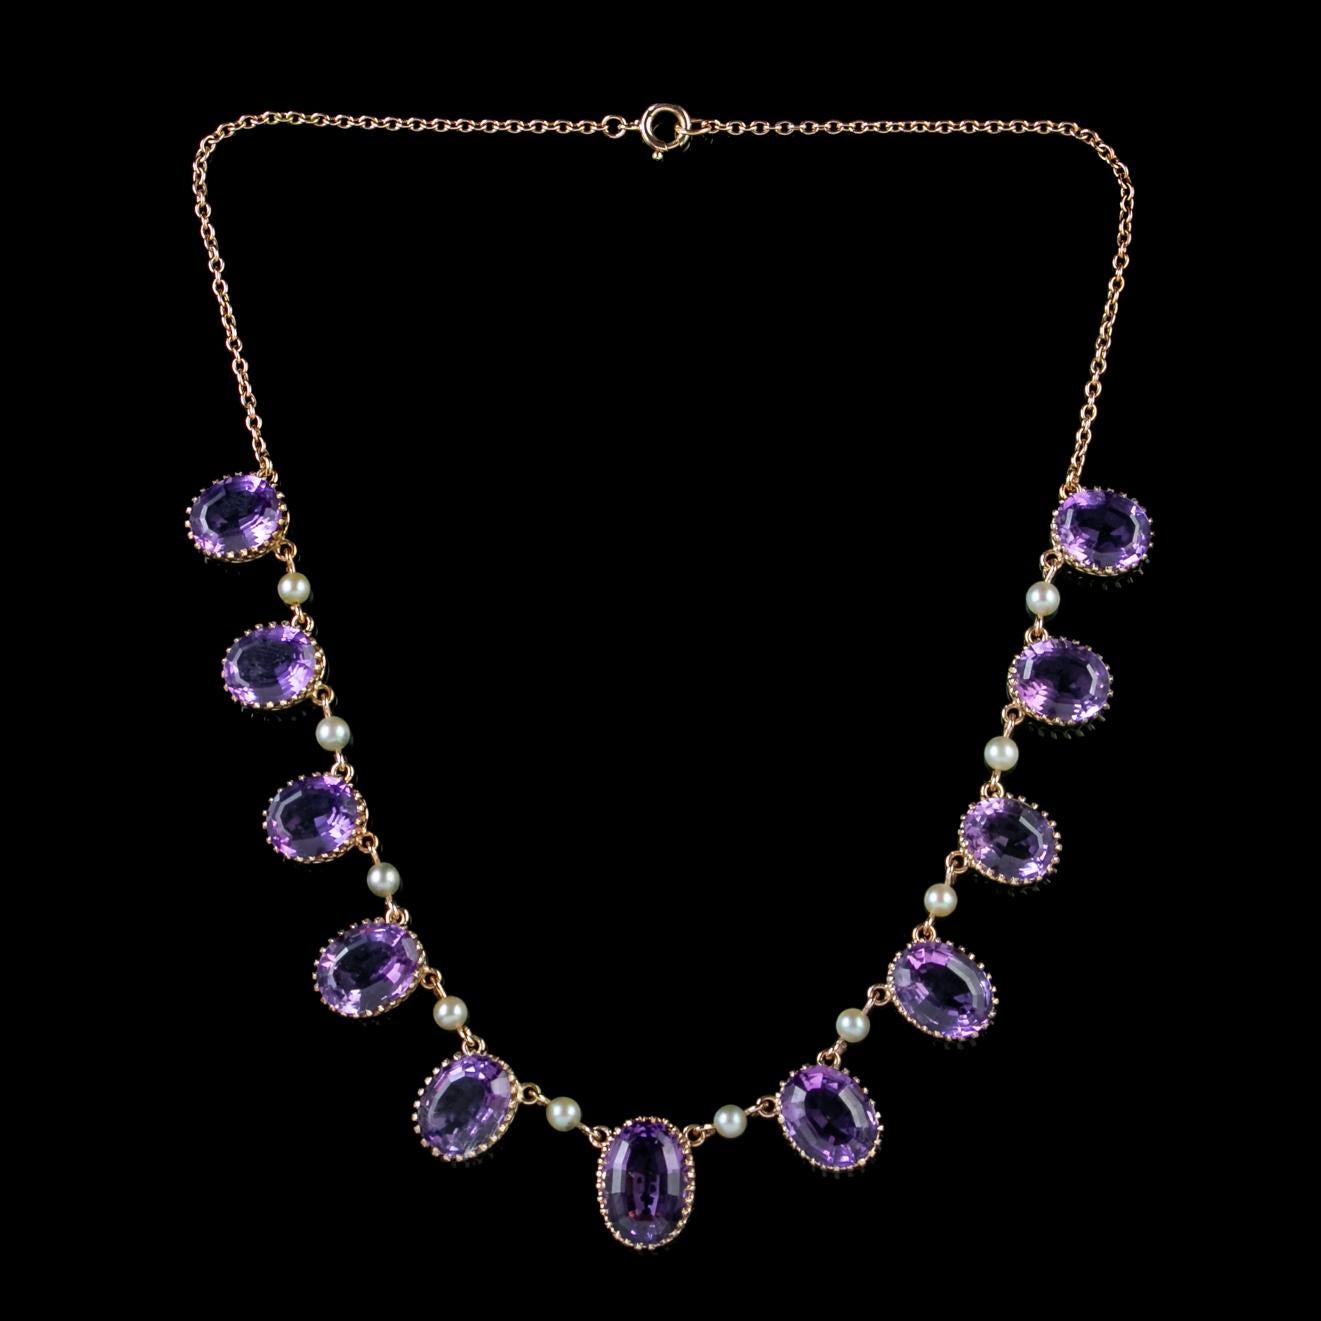 Women's Antique Victorian Amethyst Pearl Garland Necklace 9 Carat Gold, circa 1900 For Sale